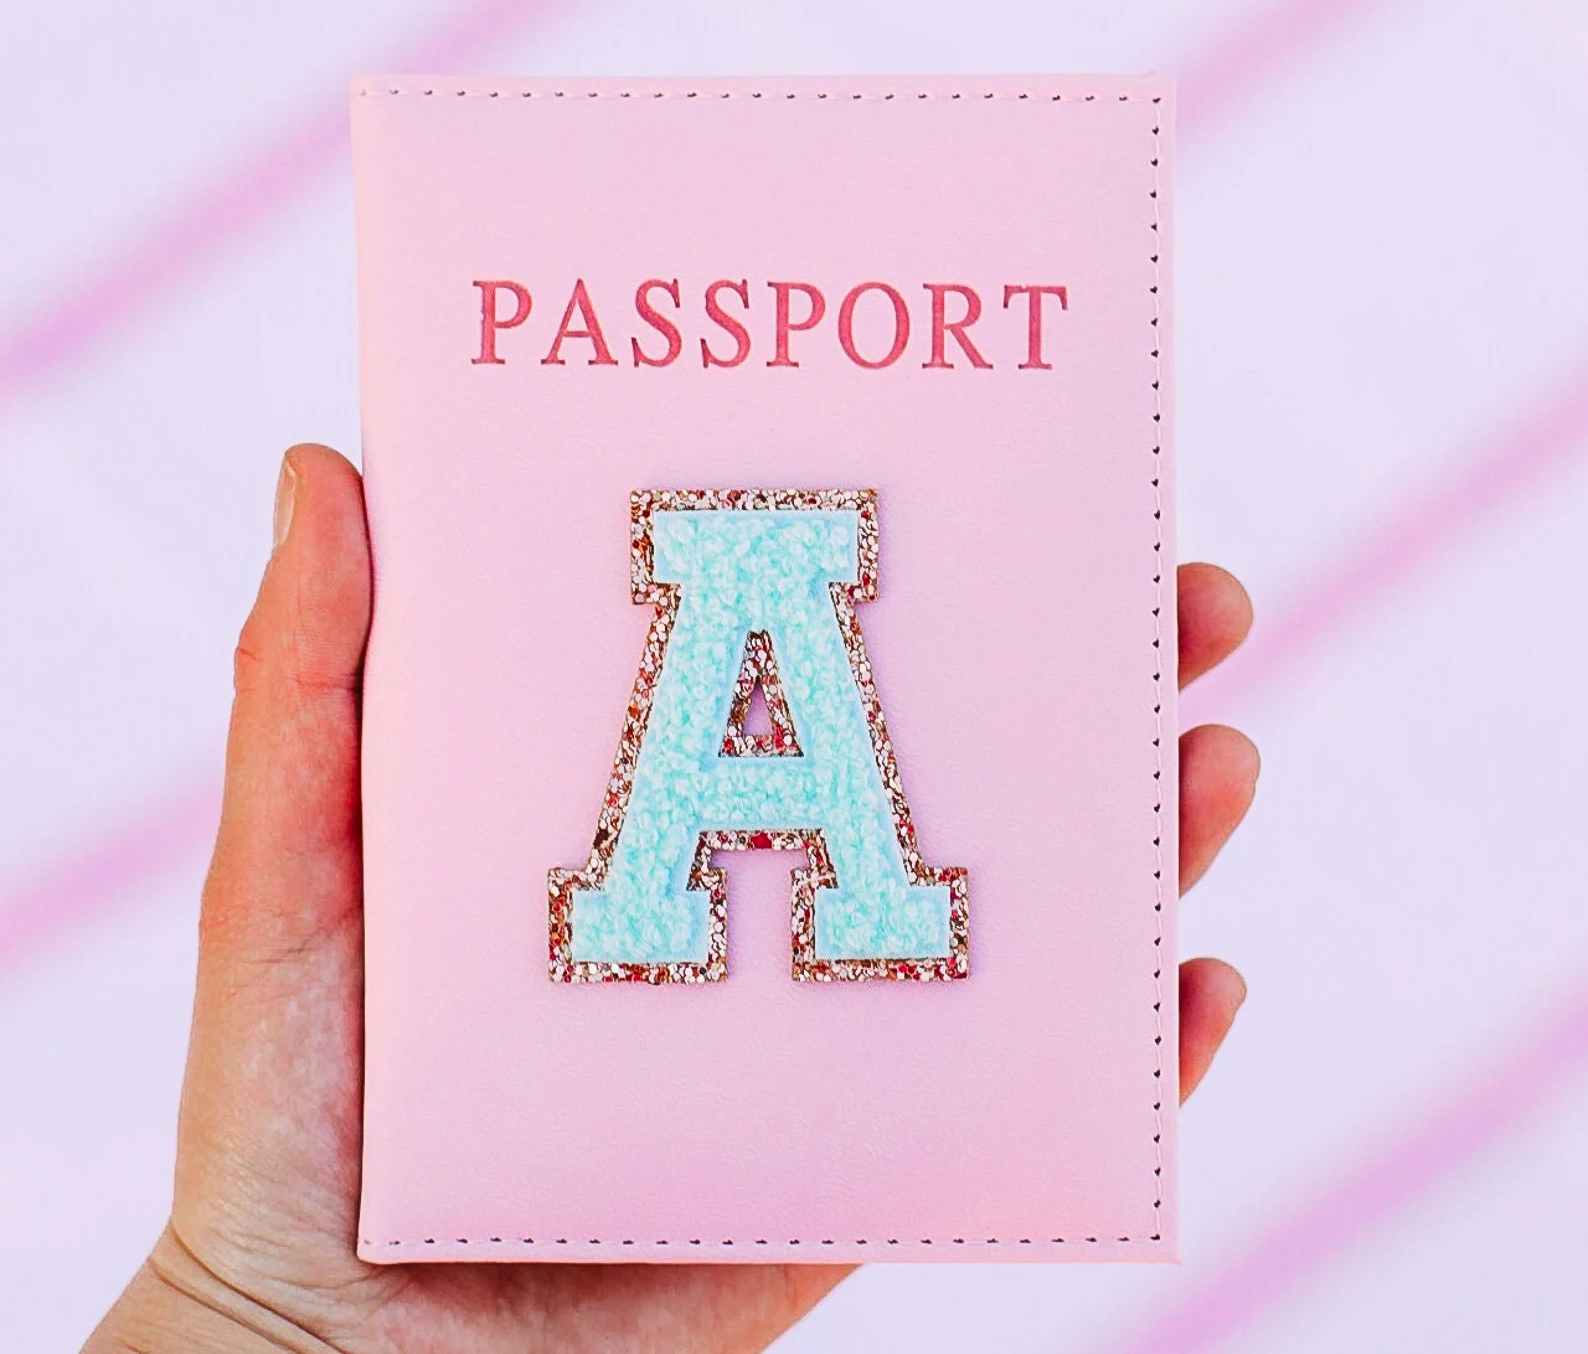 A person's hand holding up a customized passport cover with the varsity letter A on it.